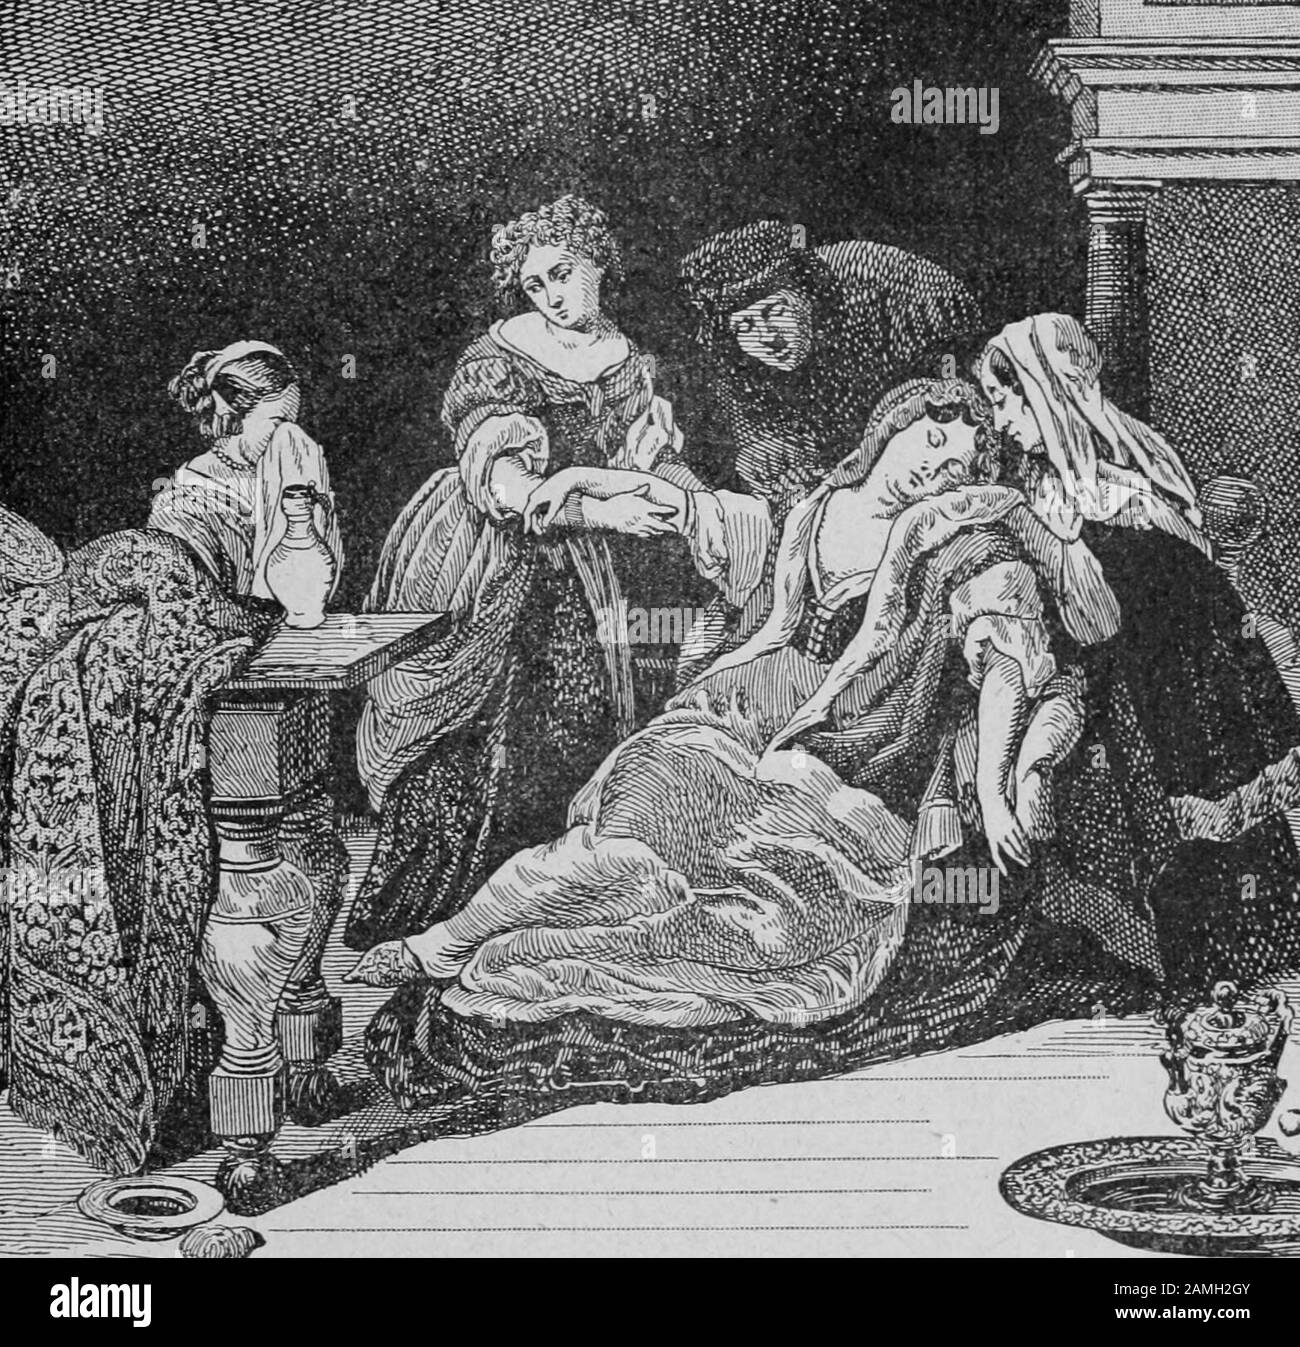 Illustration of a group of people surrounding a woman who has fainted, by Eglon van der Neer, from the book 'Curiosites Medico-Artistiques' by author Lucien Nass, published by La Librairie Mondiale, 1907. Courtesy Internet Archive. () Stock Photo